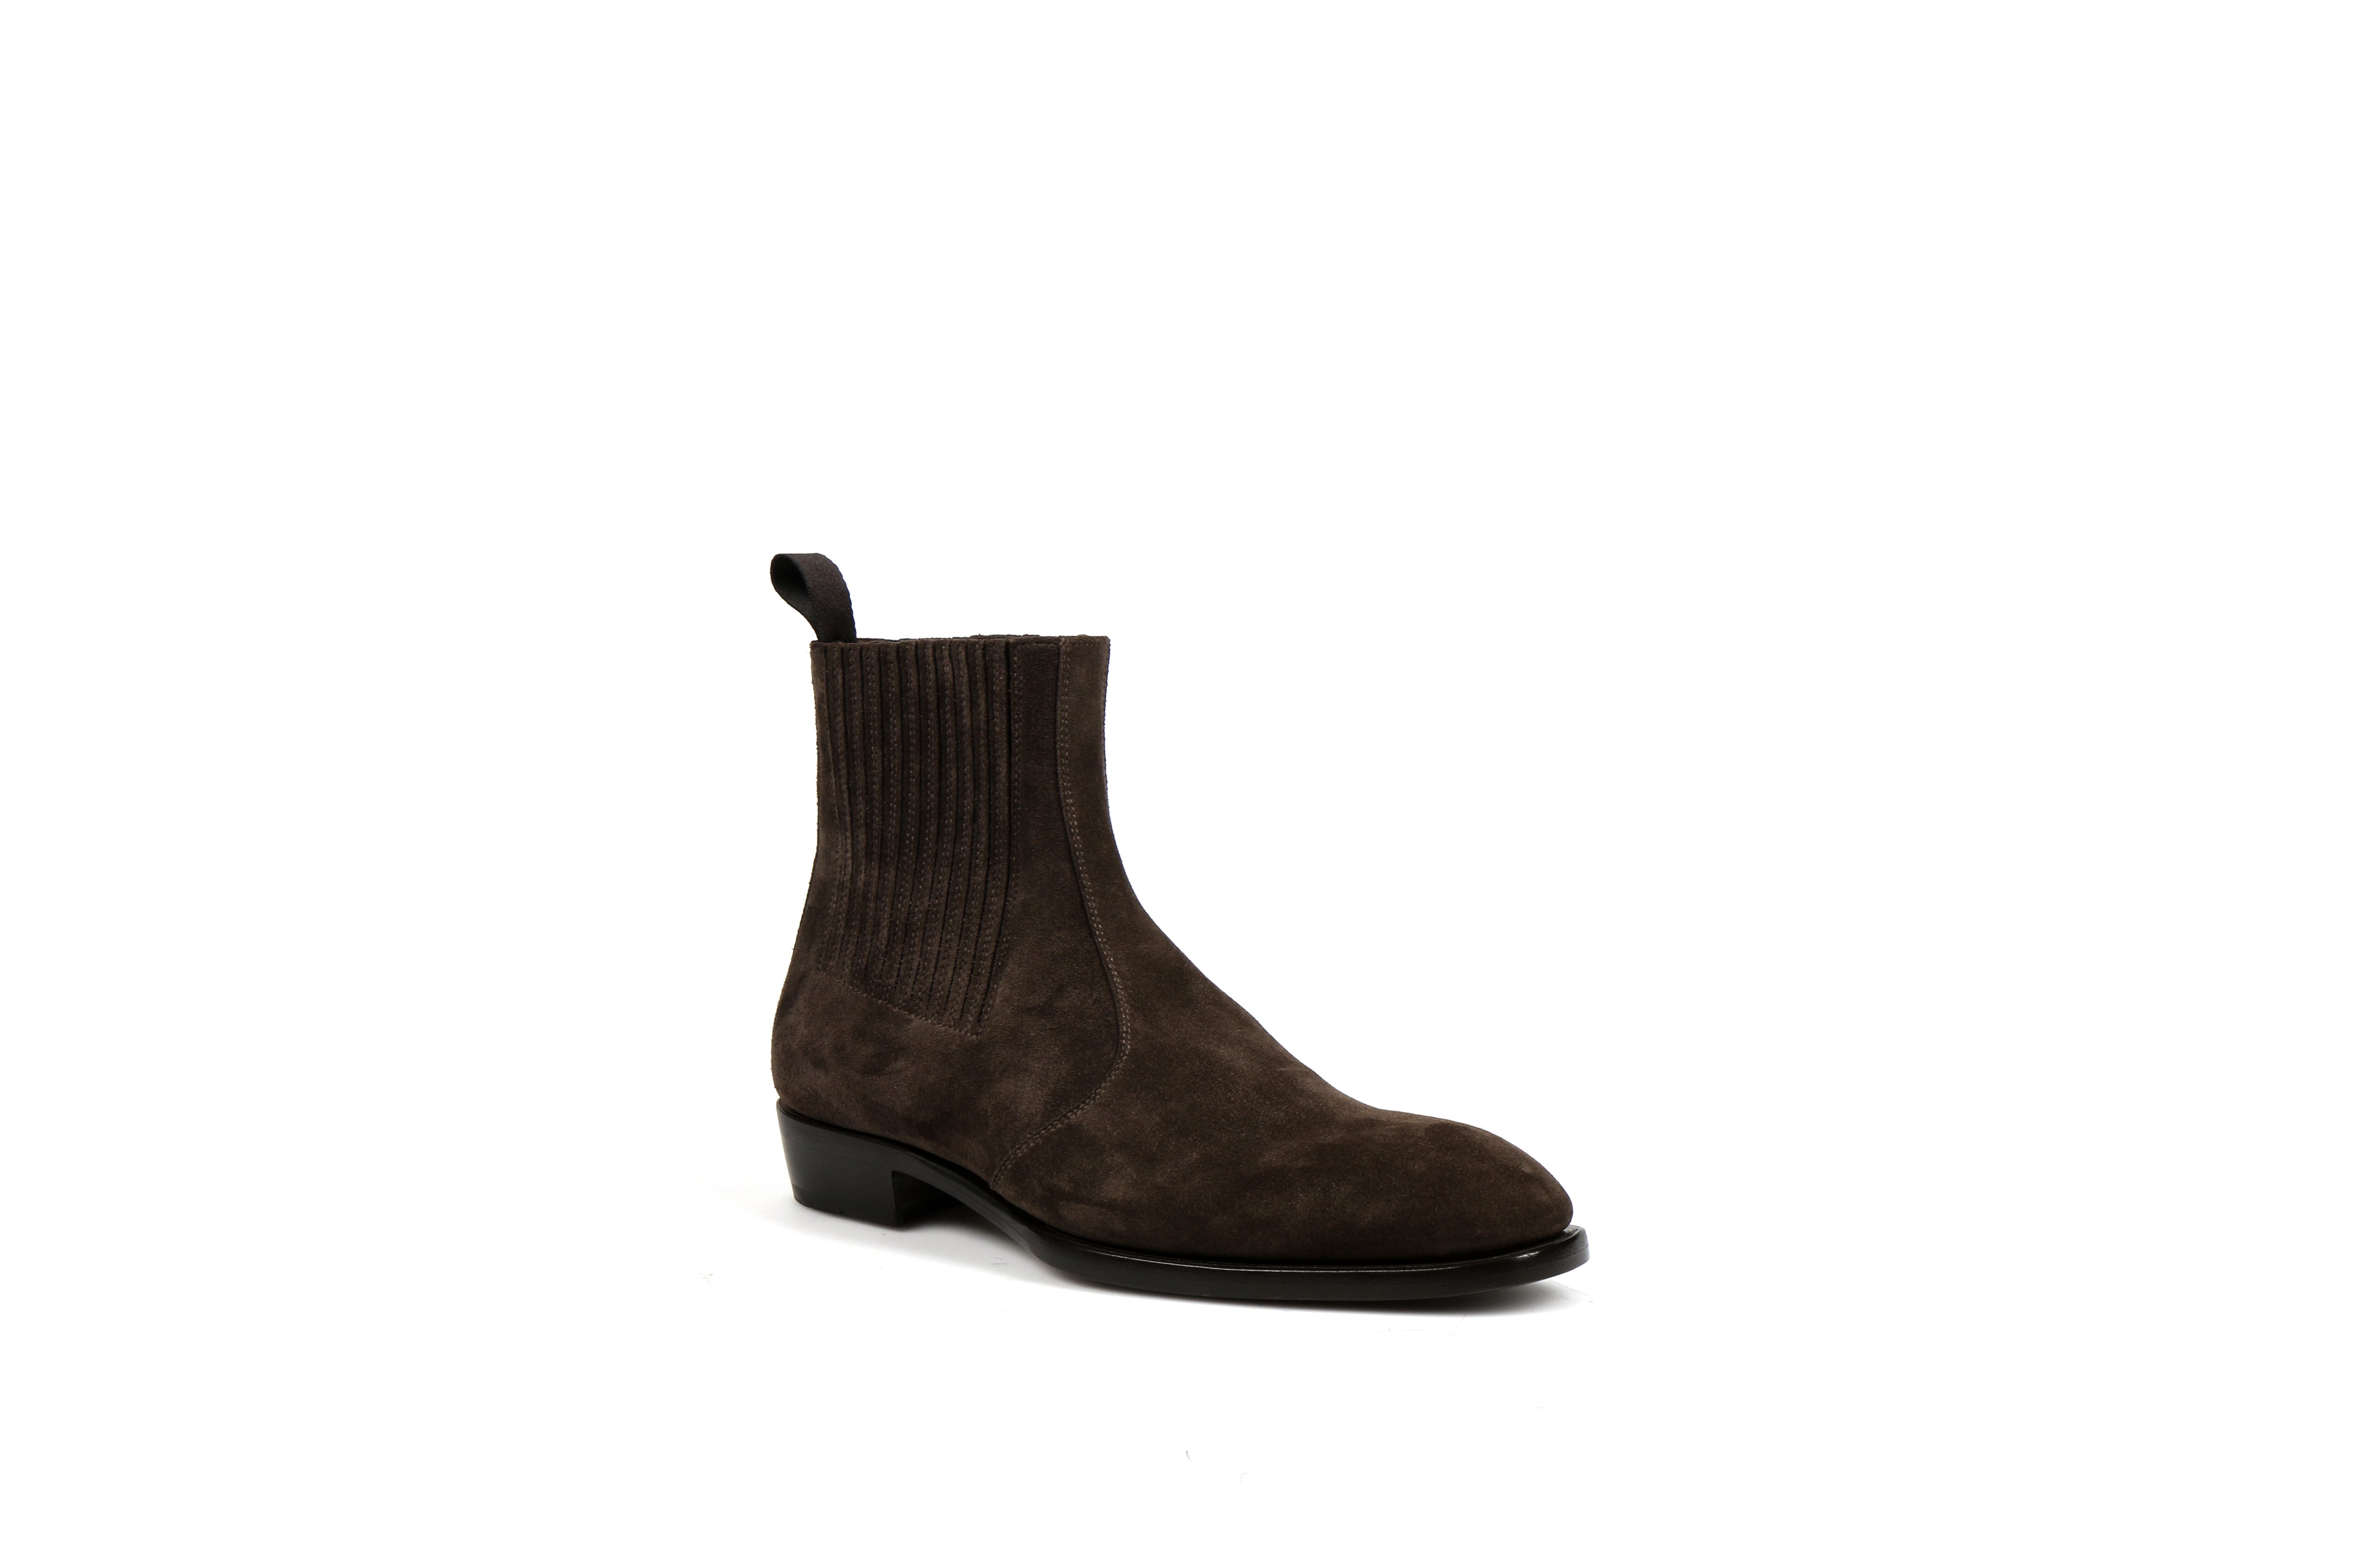 Jay Coffee Suede Leather Chelsea Boots